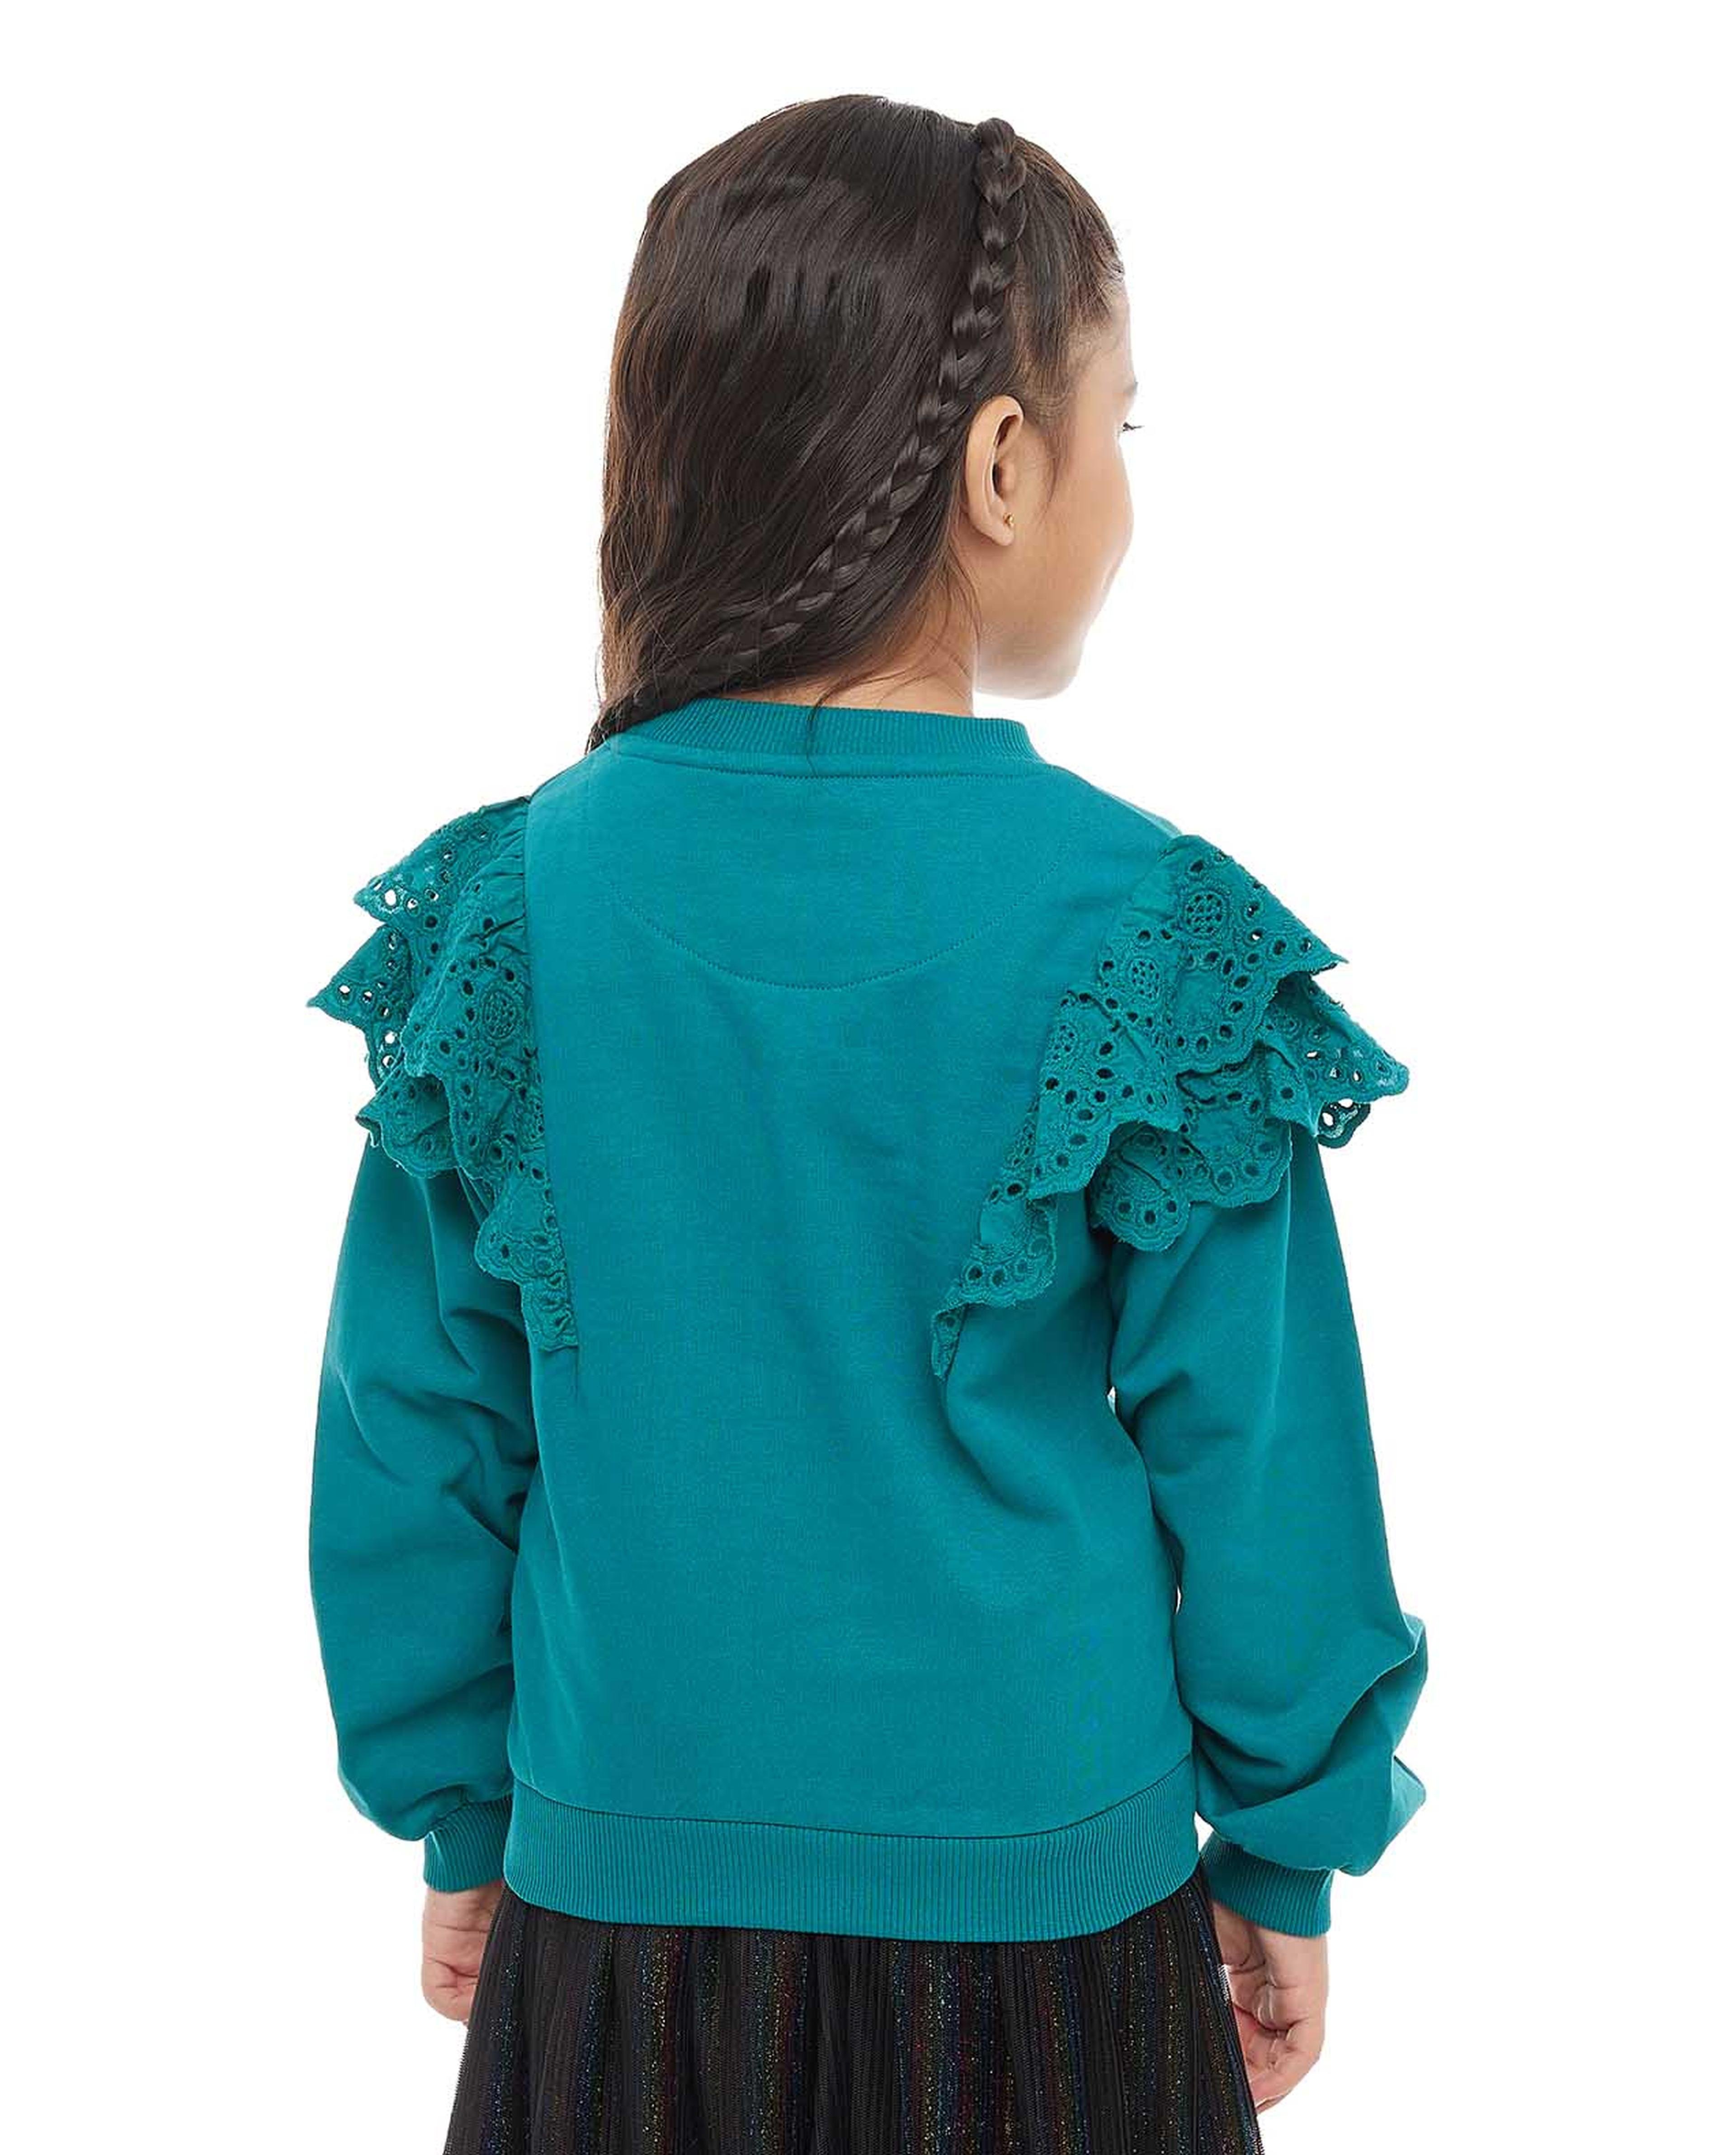 Ruffle Detail Sweatshirt with Crew Neck and Long Sleeves